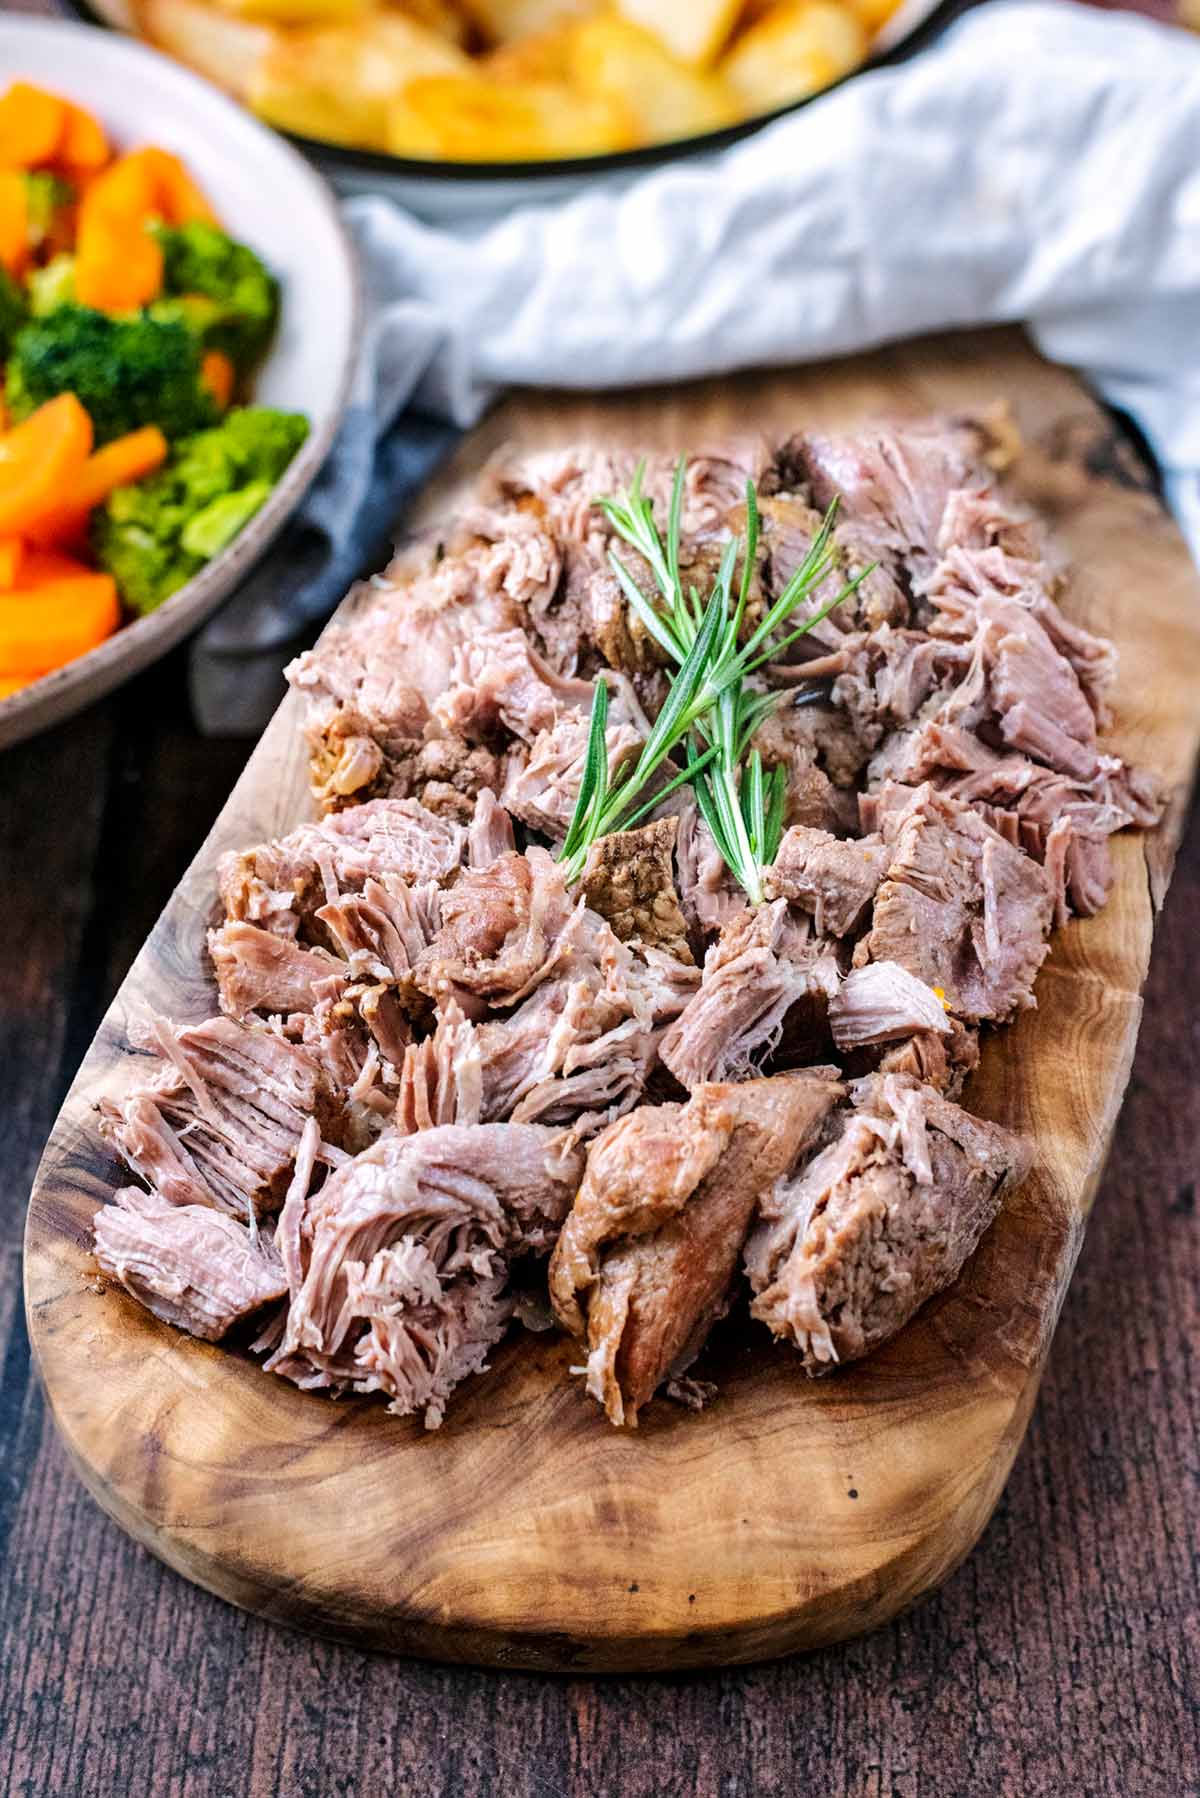 Cooked shredded lamb on a serving board in front of bowls of vegetables.